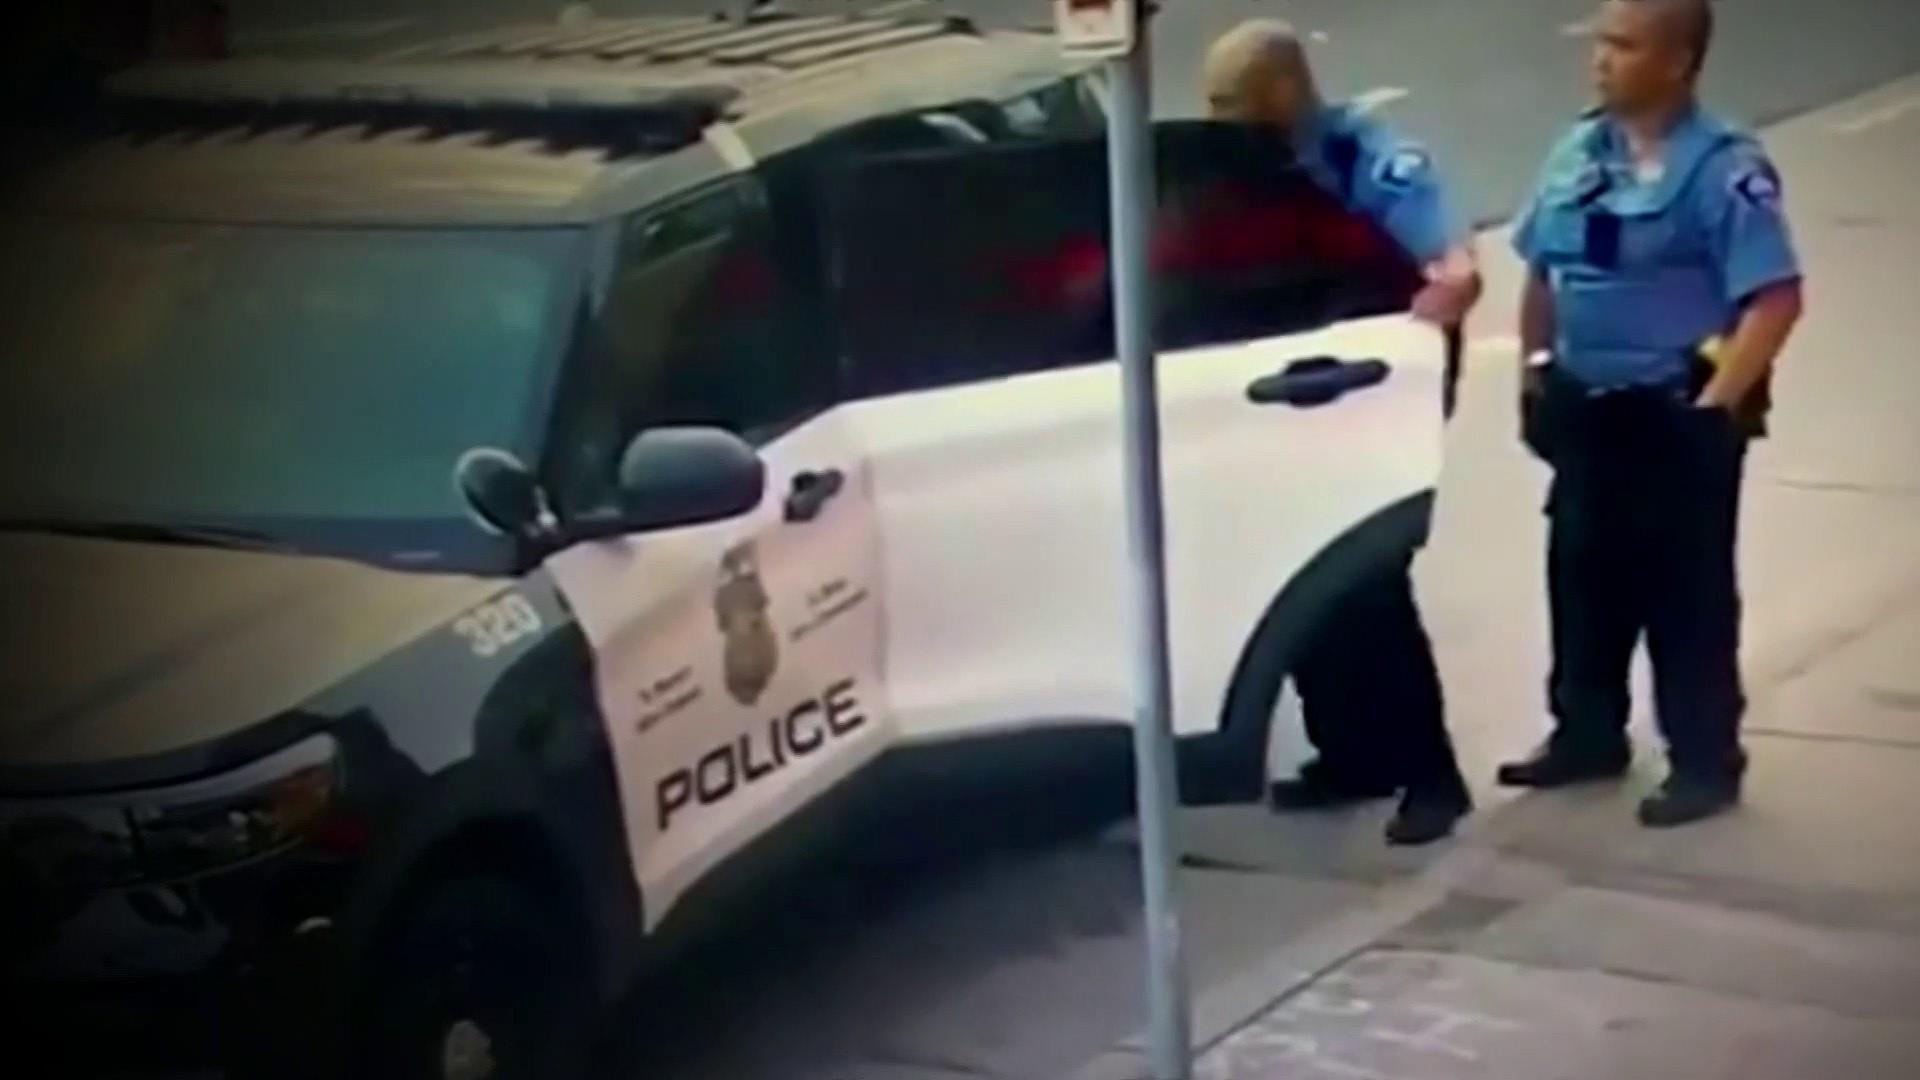 Video Appears To Show George Floyd In Struggle In Police Vehicle